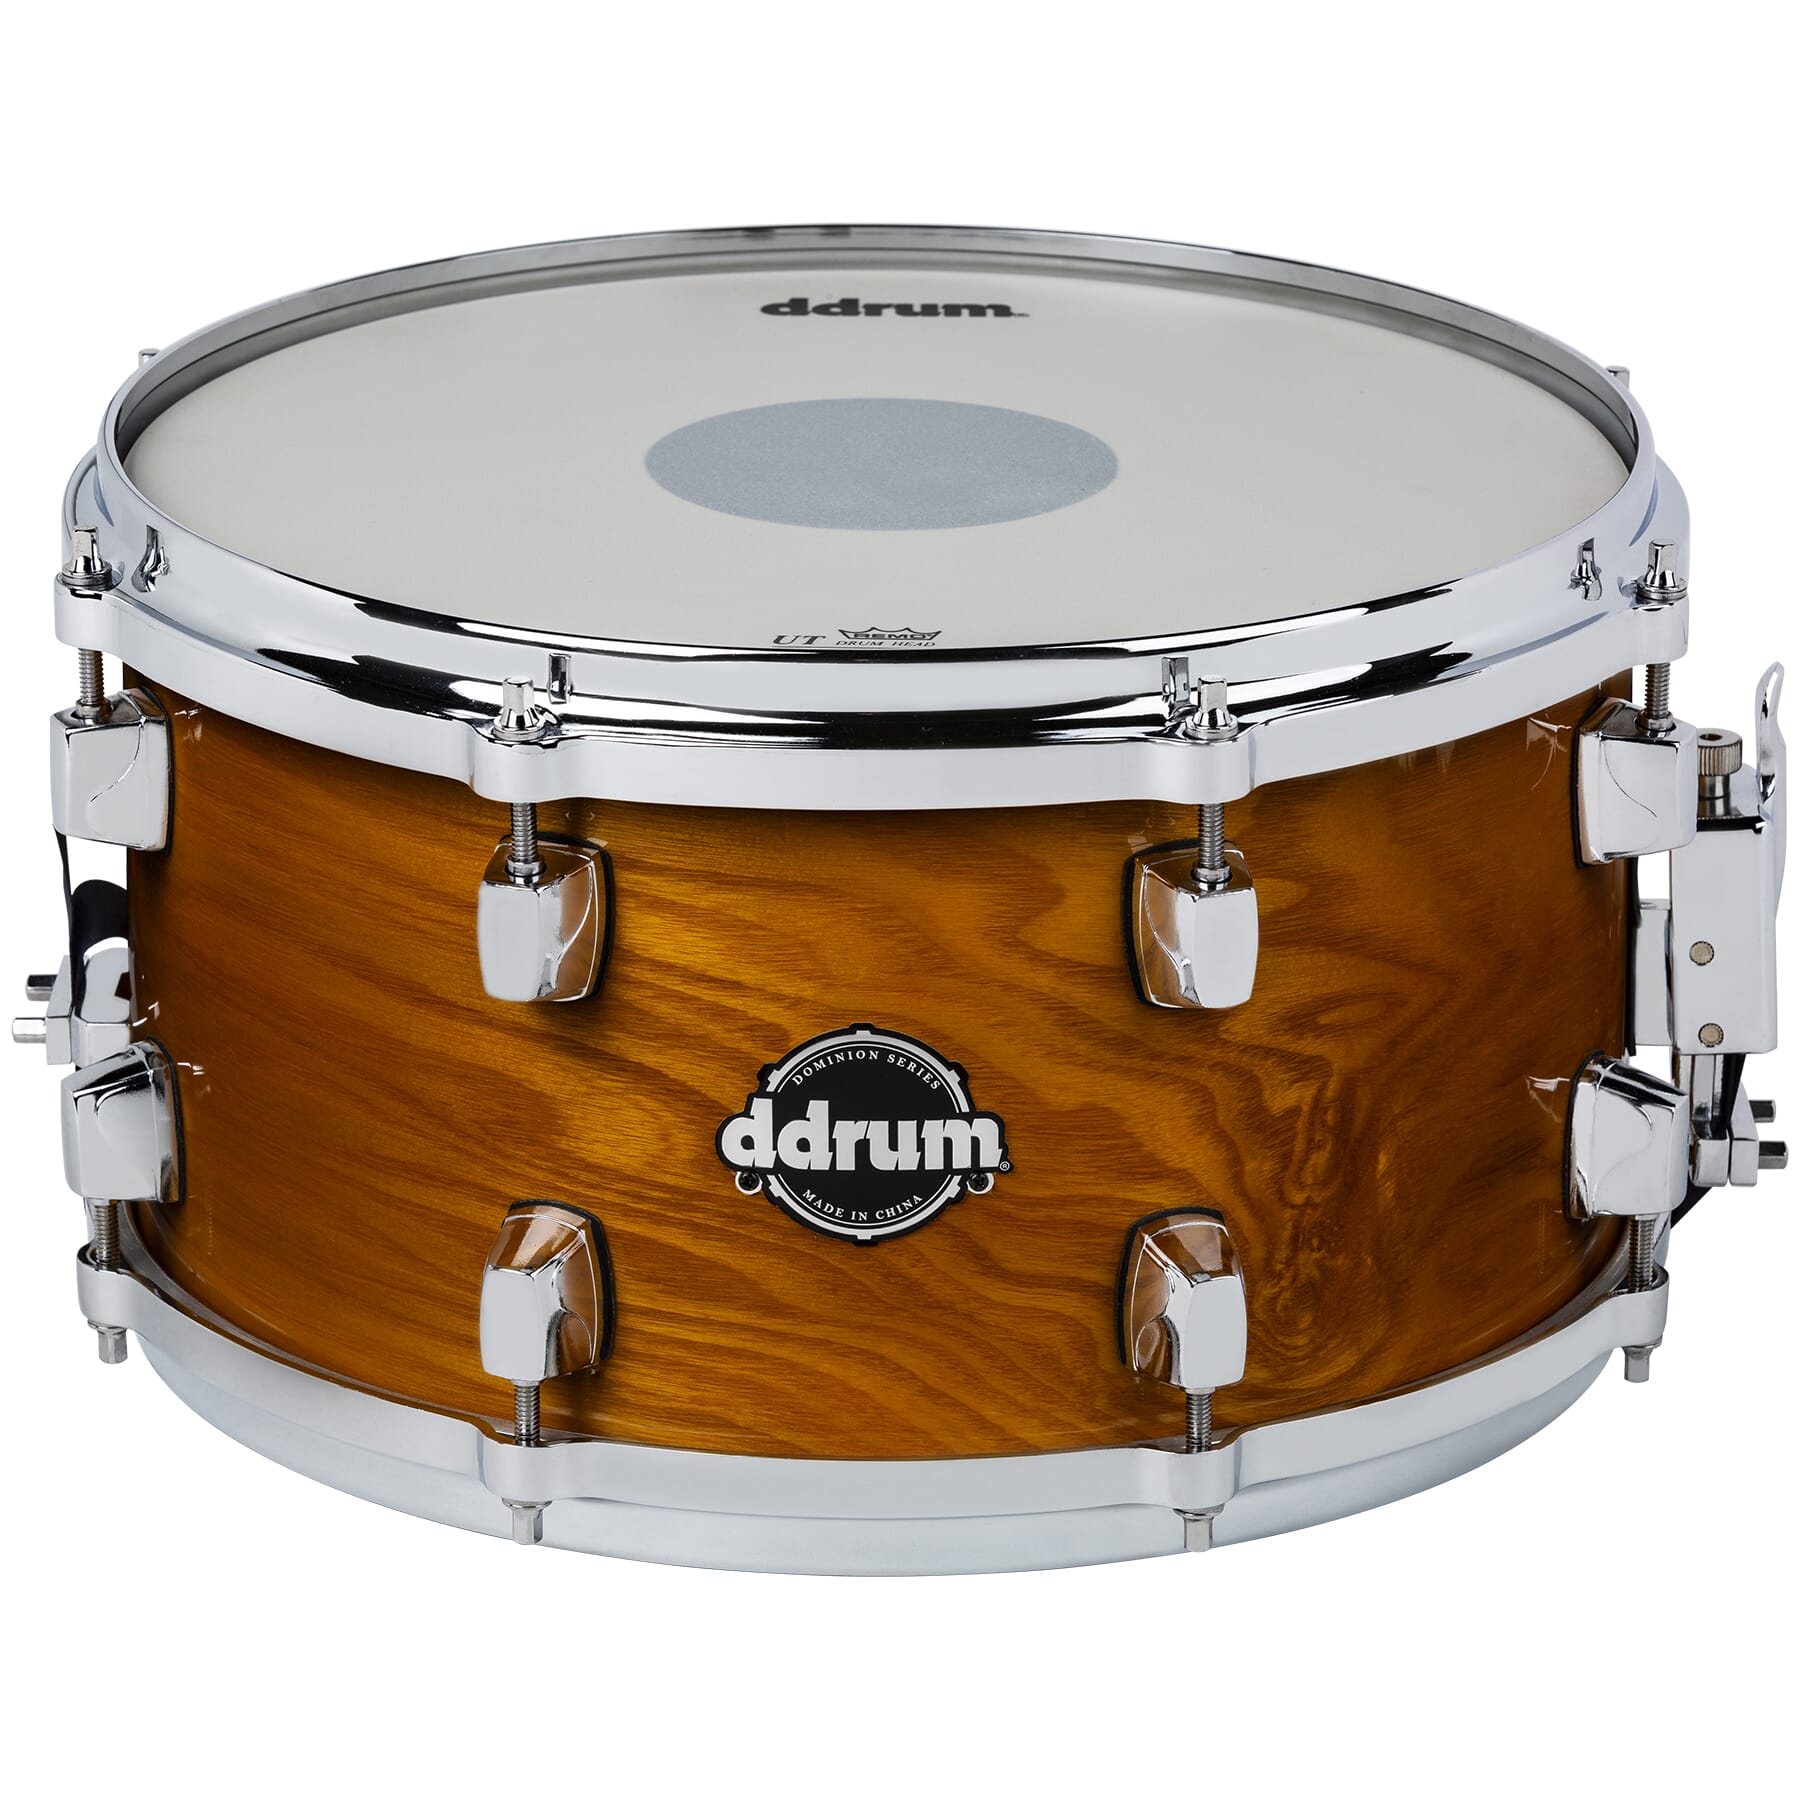 Dominion Series 7x13 Gloss Natural Snare Drum